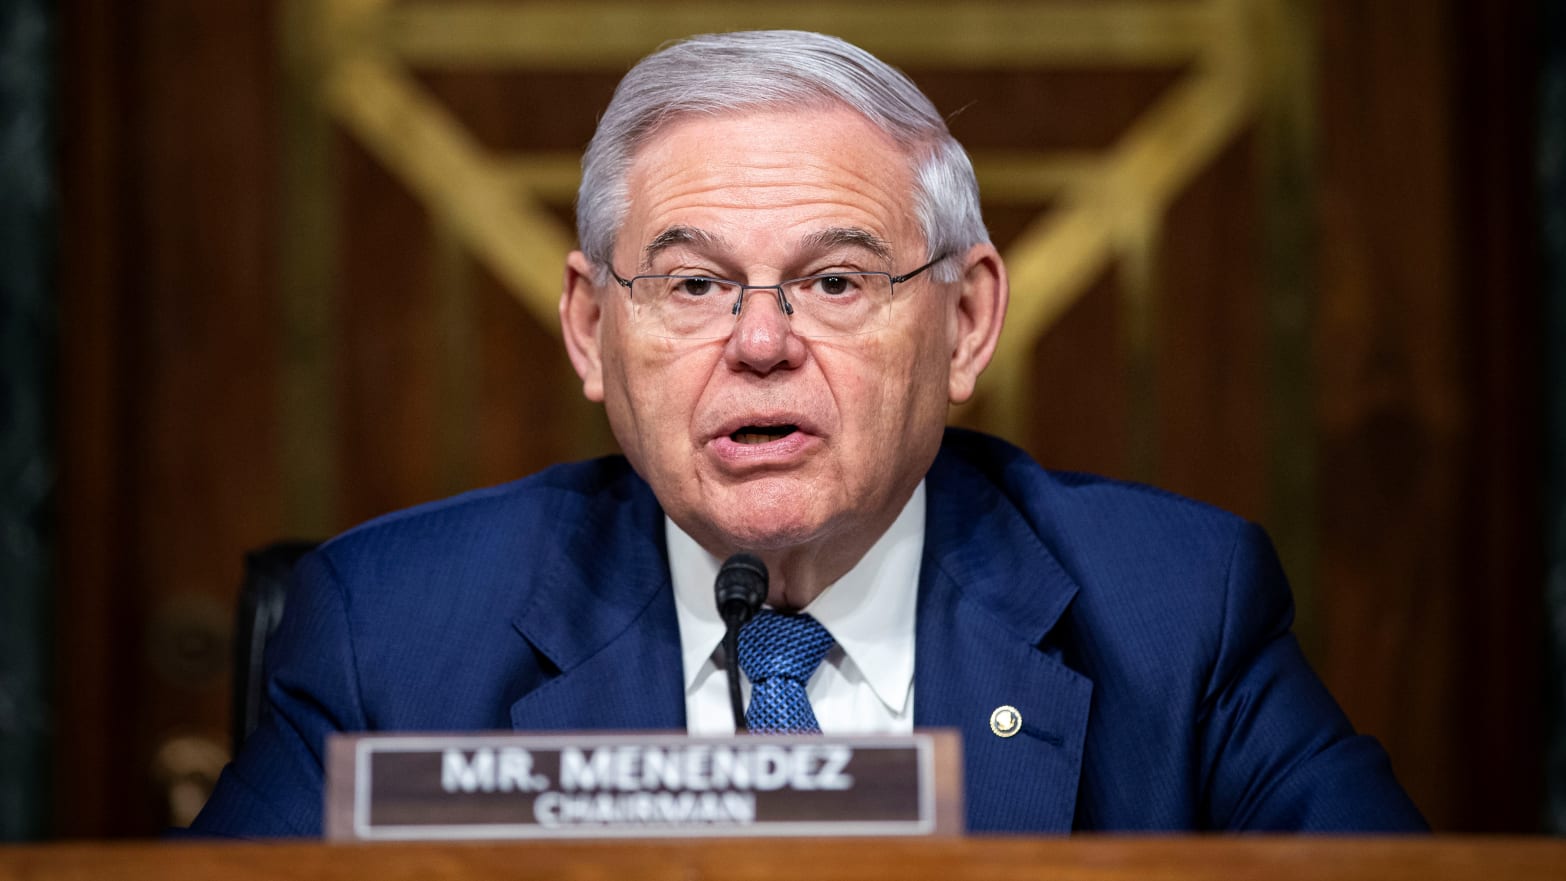 Senator Robert Menendez, a Democrat from New Jersey and chairman of the Senate Foreign Relations Committee, speaks during a hearing in Washington, U.S., April 26, 2022. 